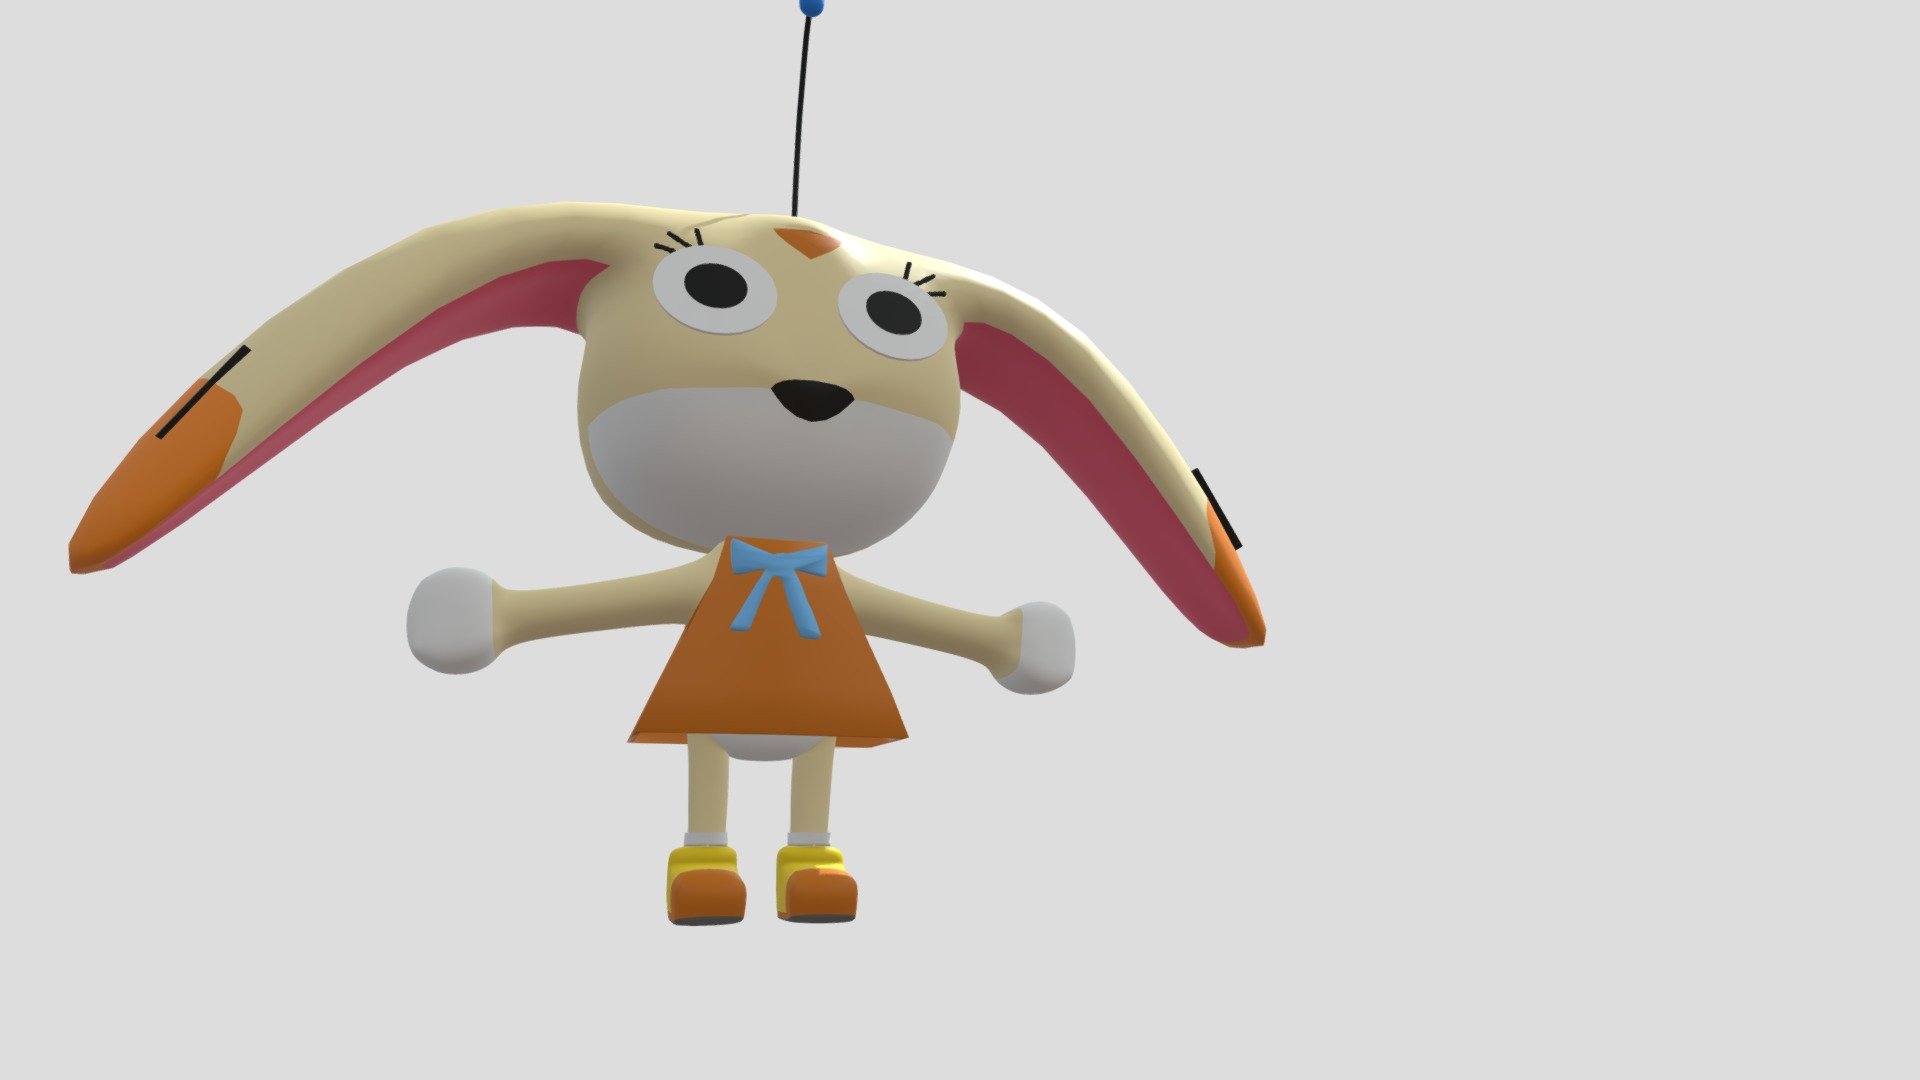 https://sonic-and-baby-greed-zone-of-time-3-of-projects.fandom.com/wiki/Cream_The_Rabbit_Doll

Cream The Rabbit Doll GR 

has appeared Mako Island somewhere and looking to enter.

Mysterious it seems it's hunting something.

The Doll has entered the real Realm of Real World 3d model